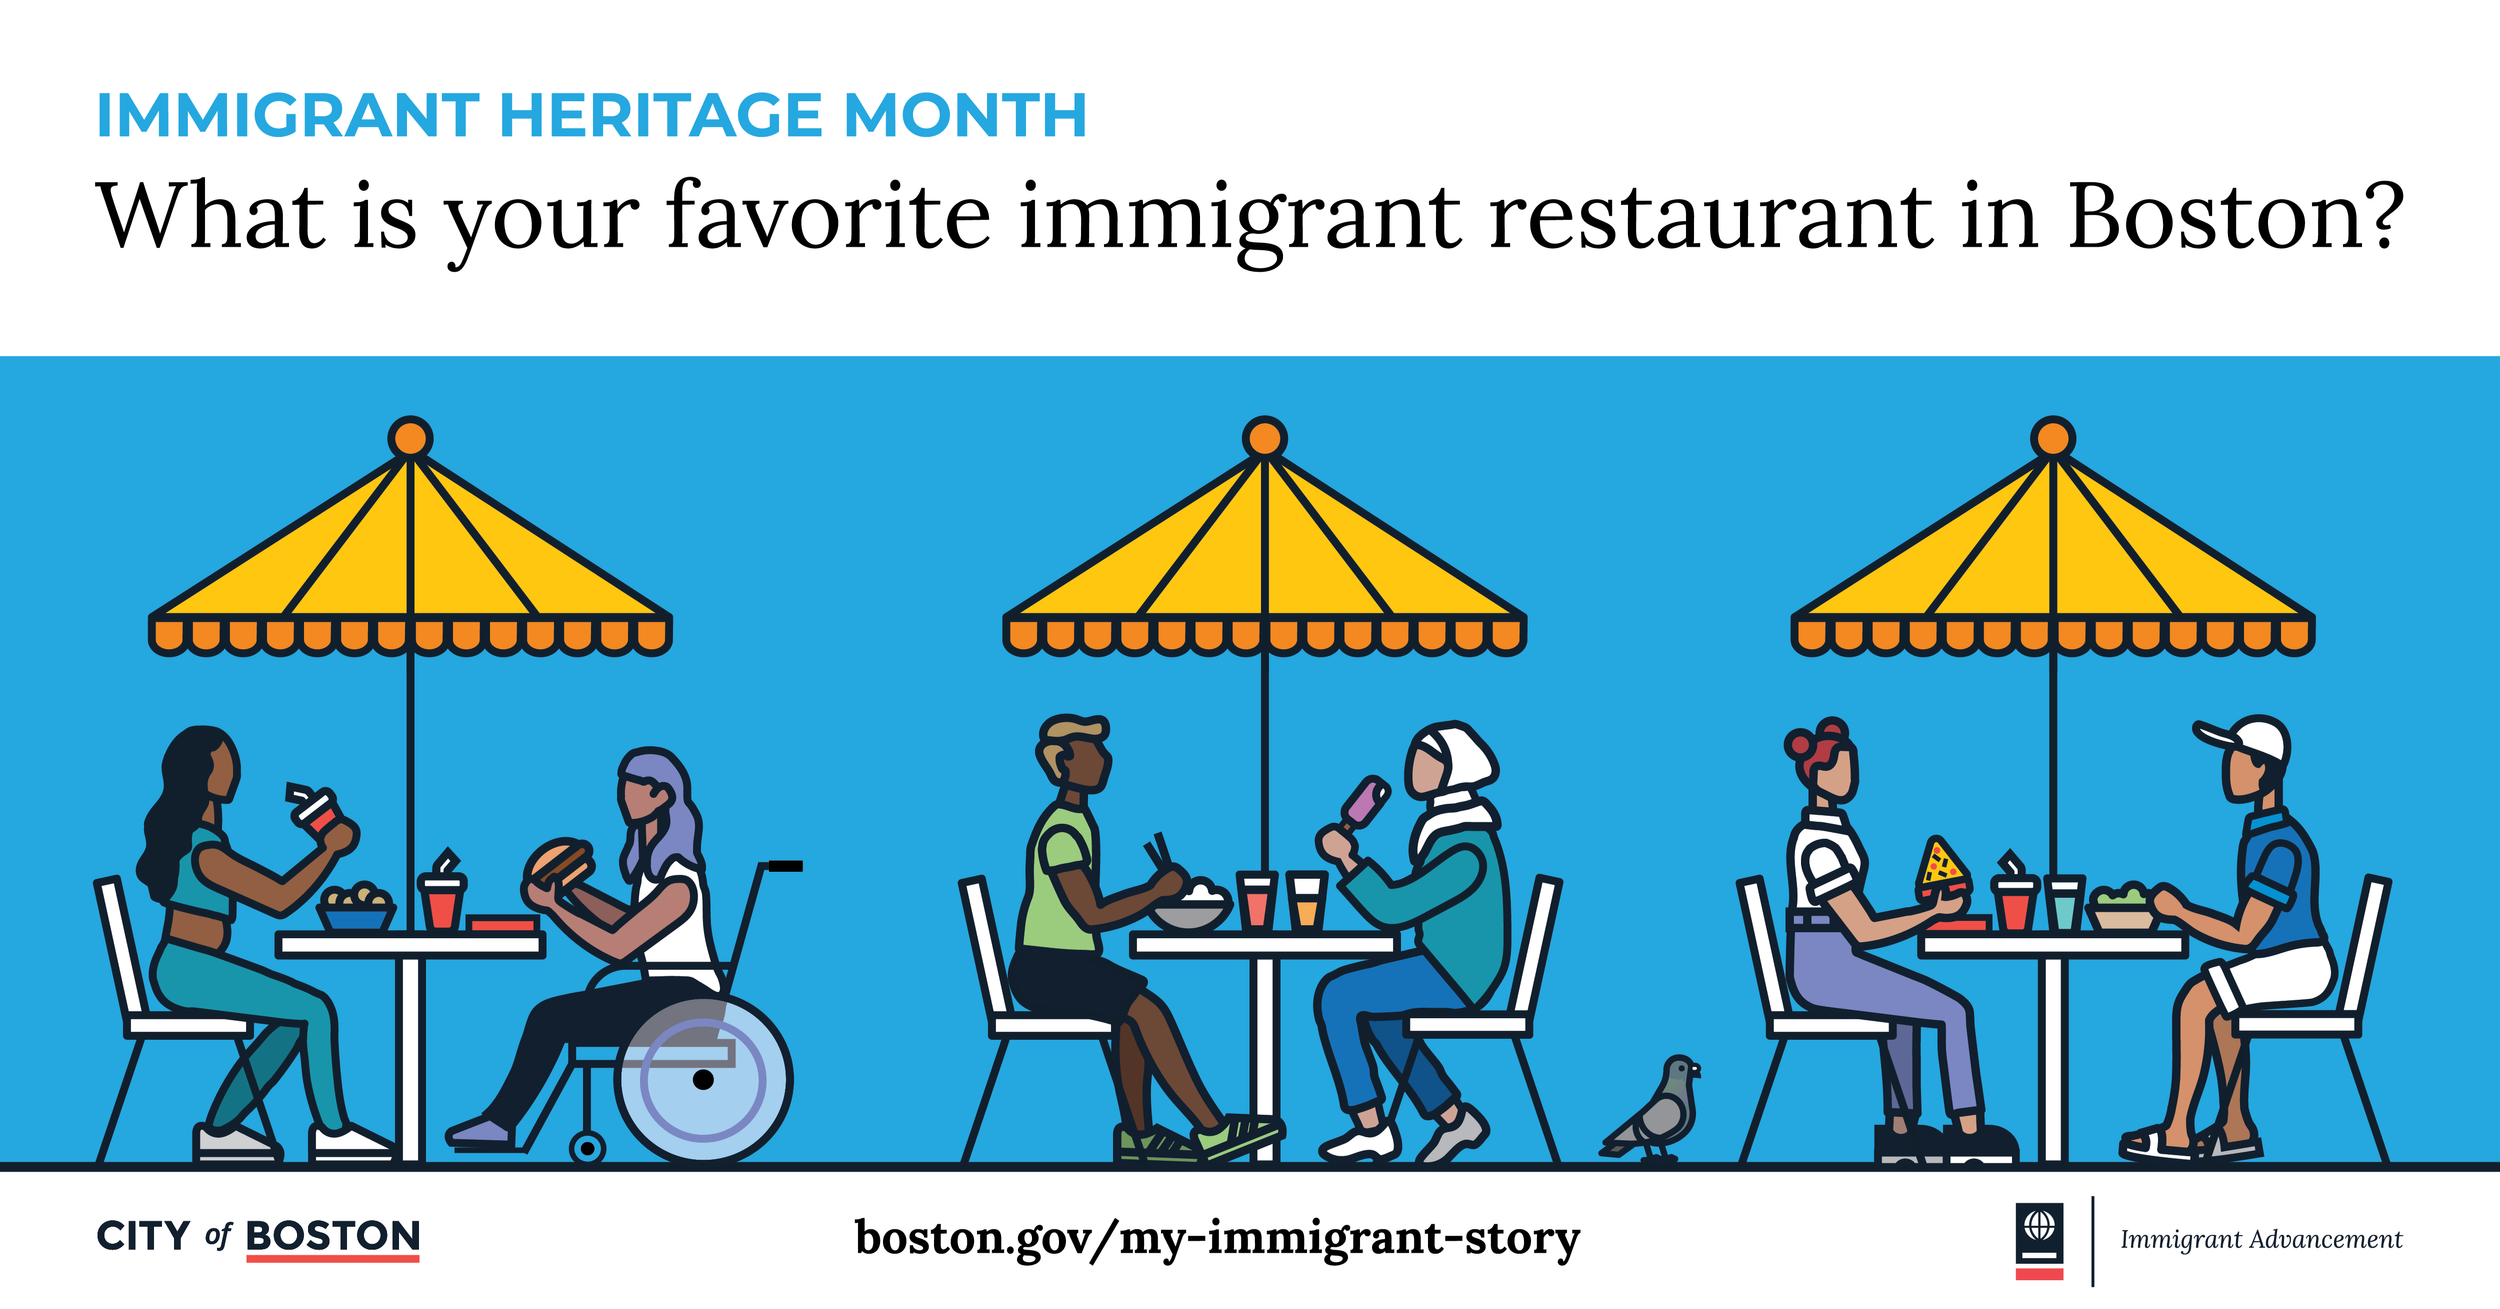 1912-01-Immigrant Heritage Month-01.png